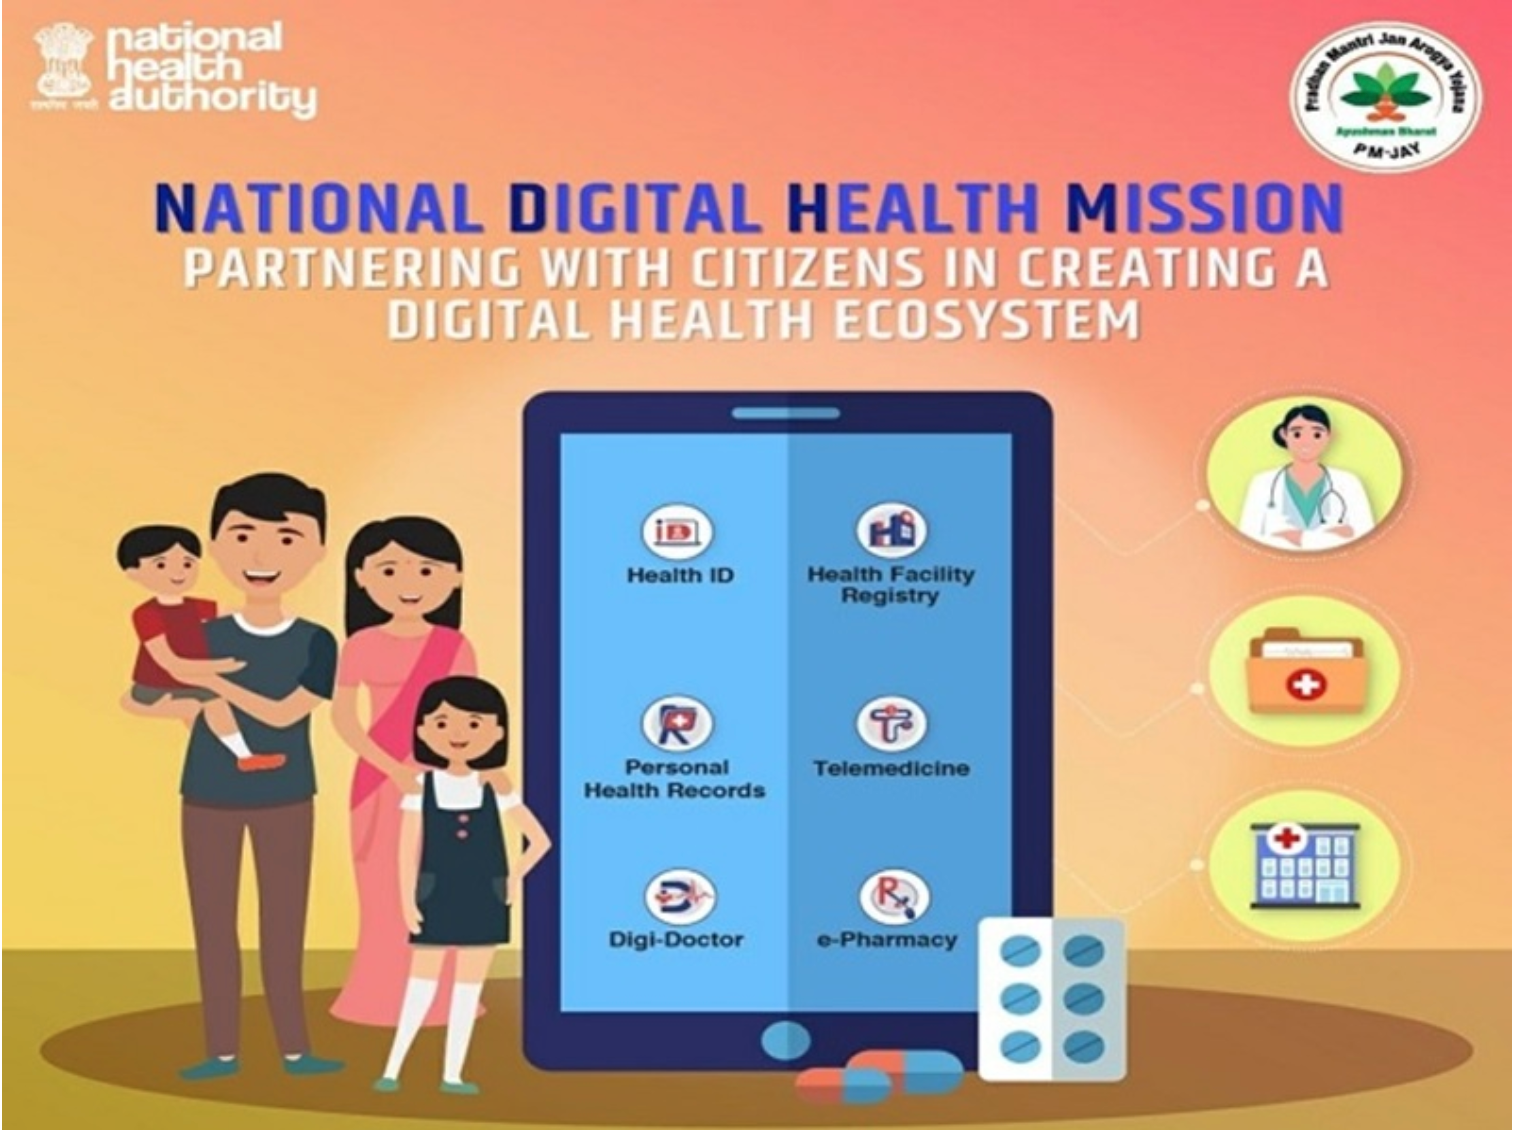 40 digital health service applications successfully integrated with Ayushman Bharat Digital Mission (ABDM)